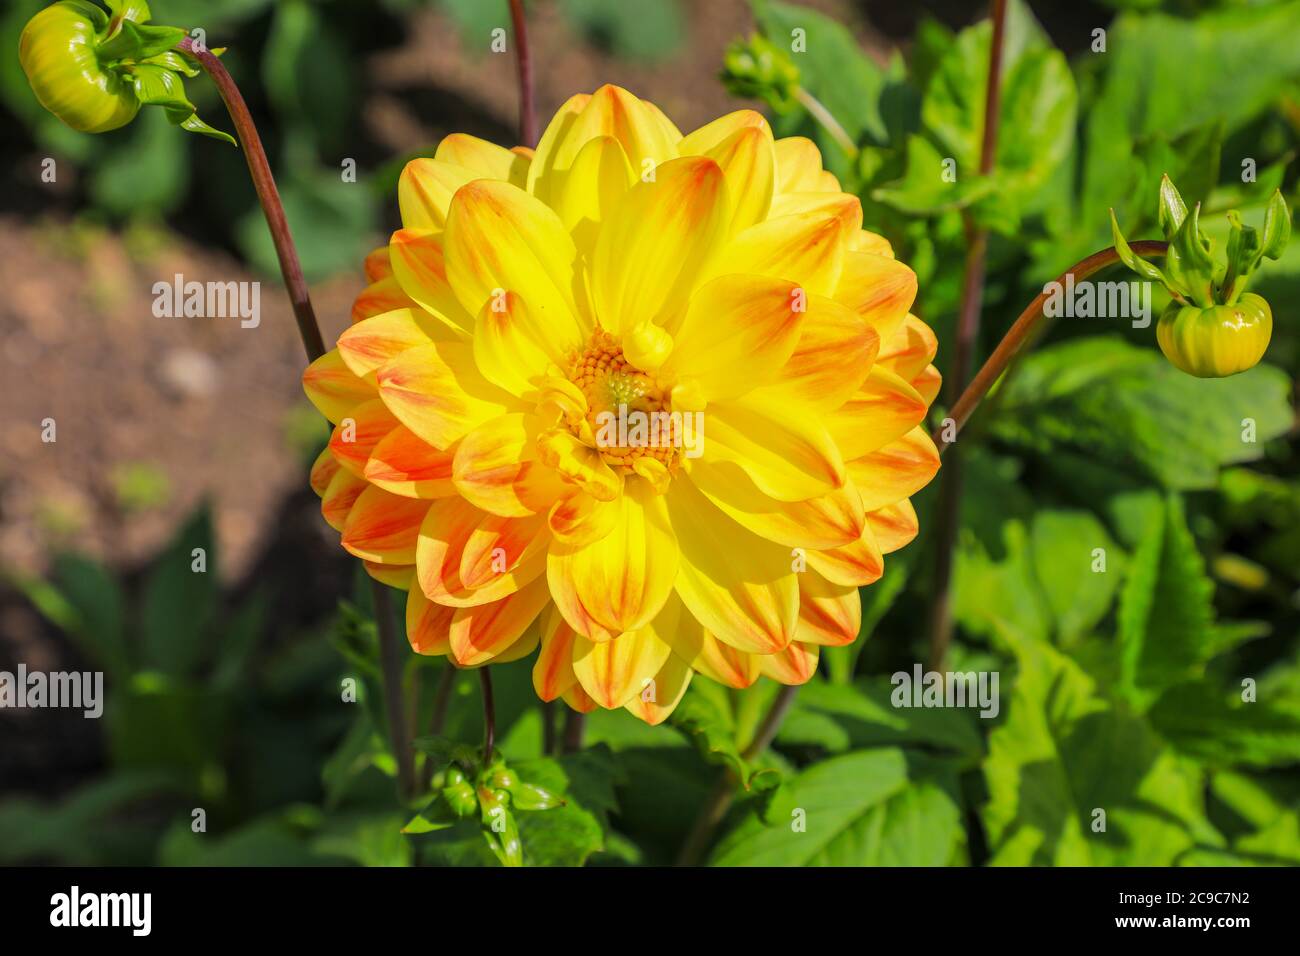 Close up shot of a yellow flower head of a Dahlia 'Flutterby' at the National Dahlia Collection, Penzance, Cornwall, England Stock Photo